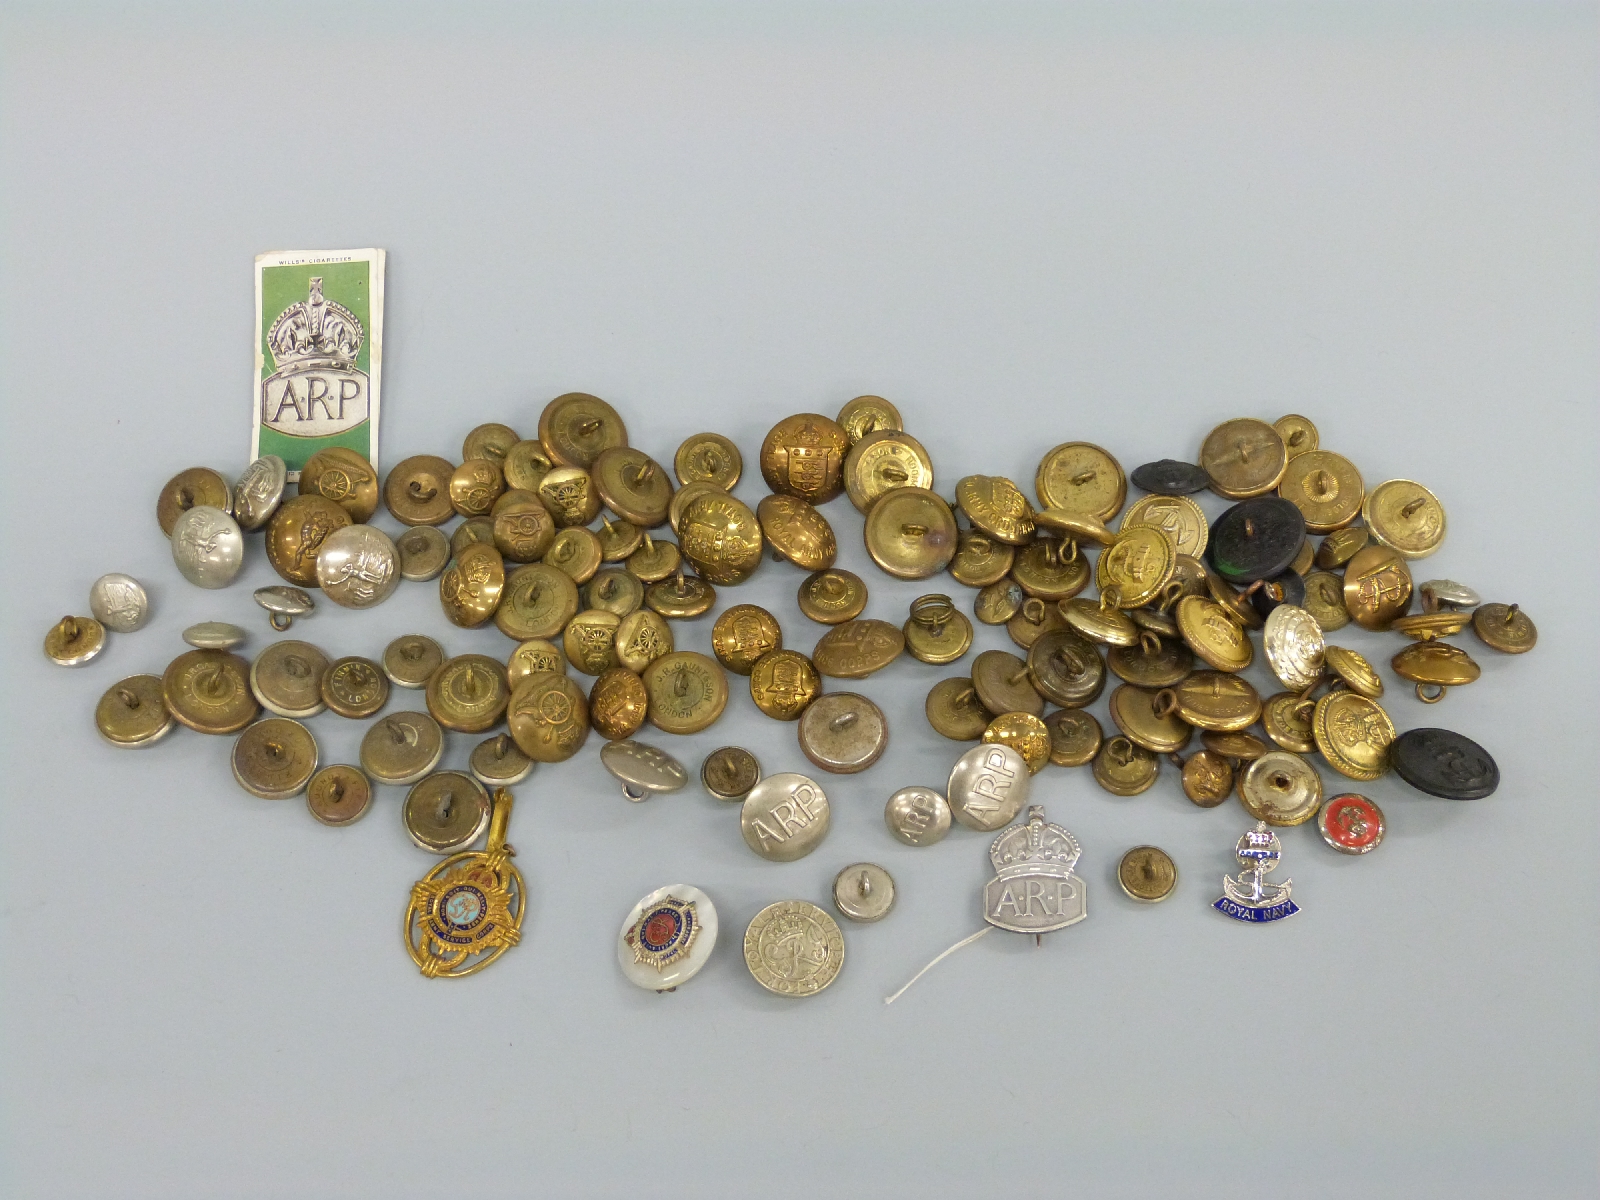 WWII military buttons including Royal Navy, Royal Air Force,